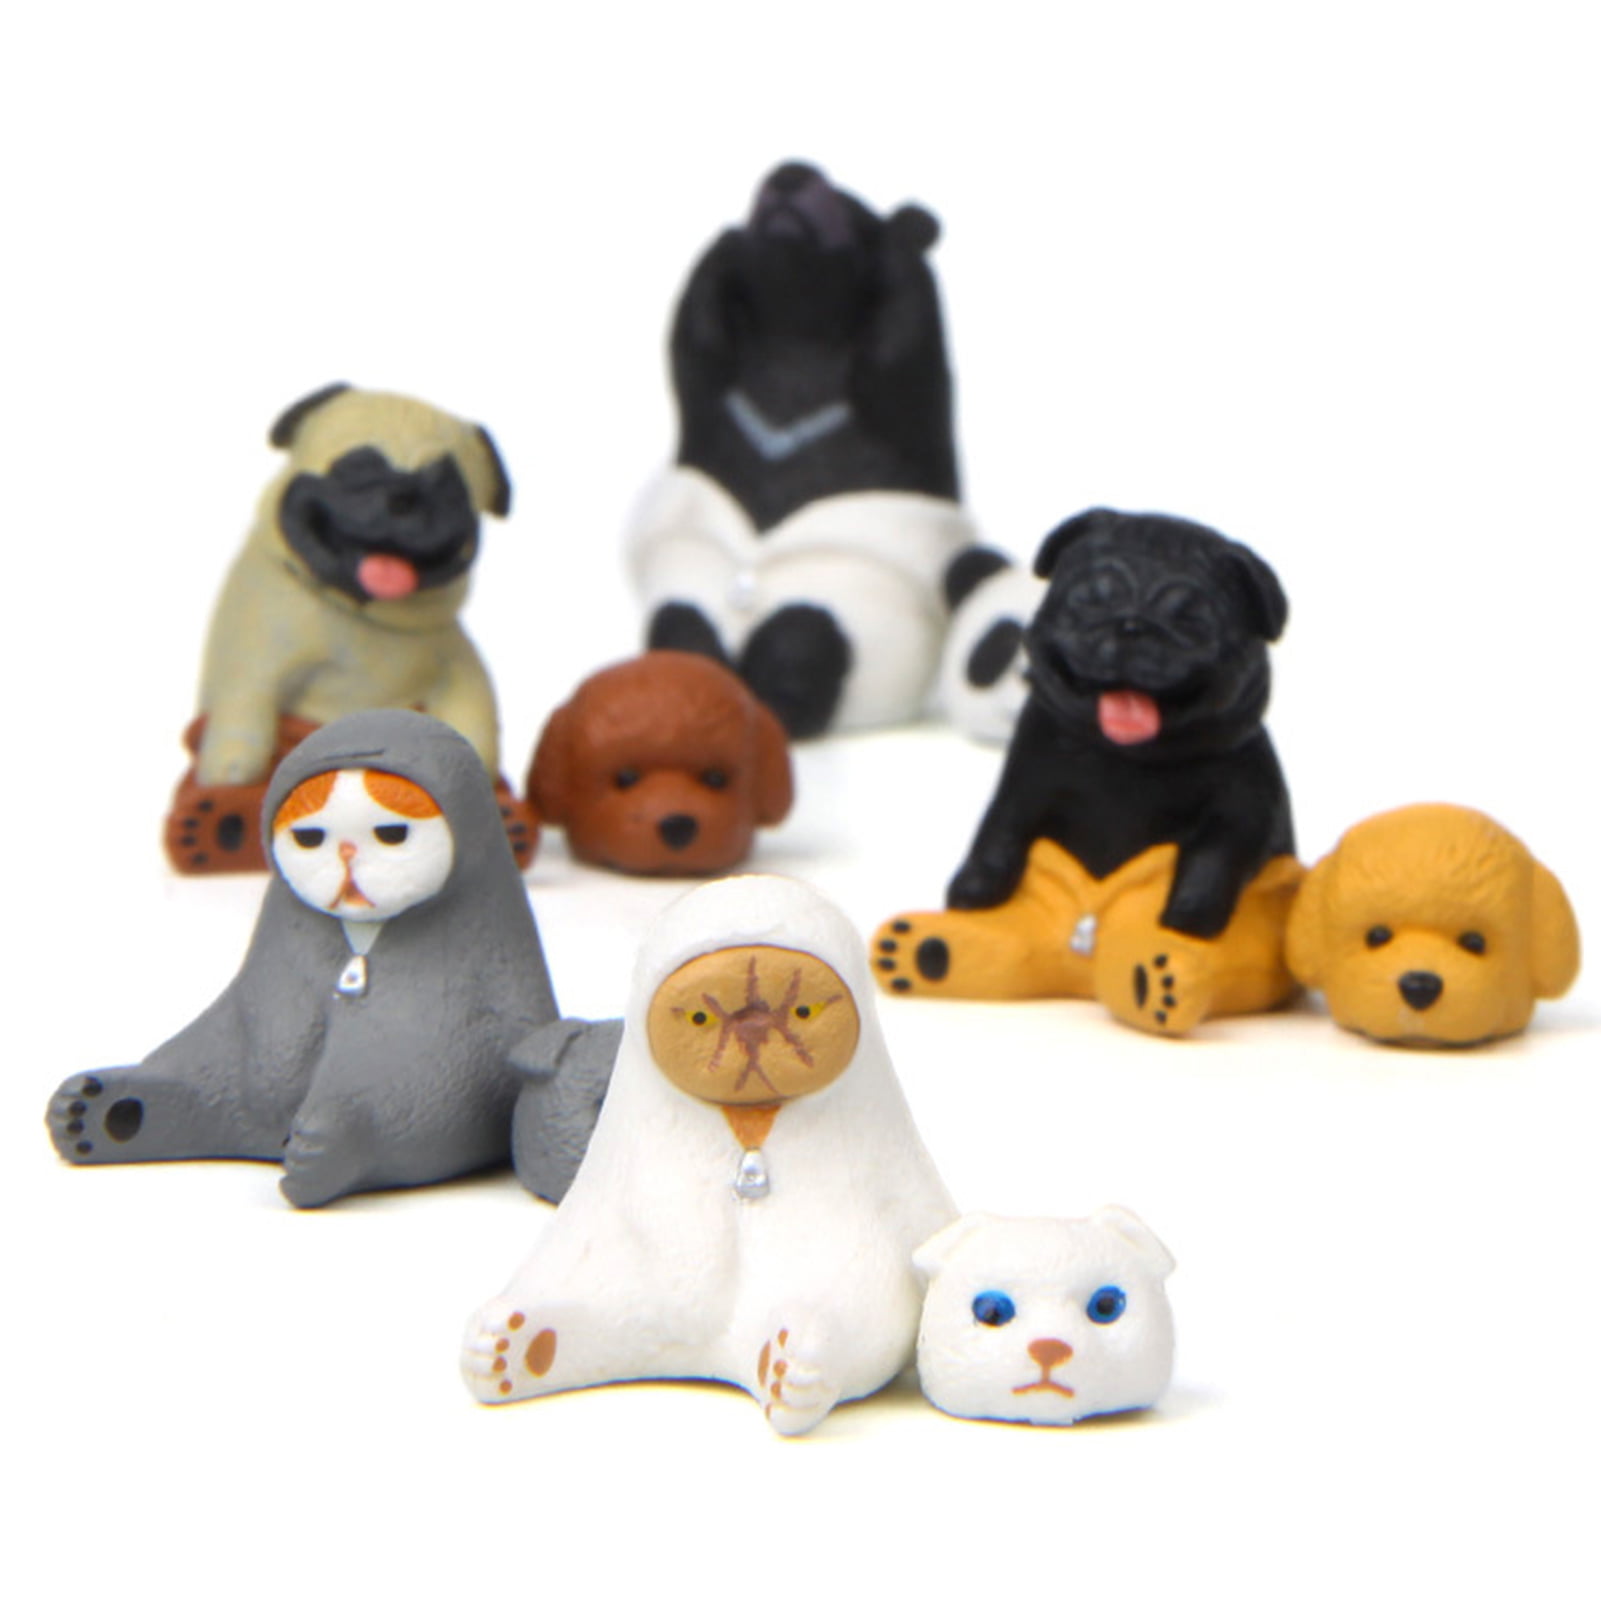 VERY SOFT NEW STUFFED CAT COLLECTOR'S CHOICE FUN-TASTIC TOYS 